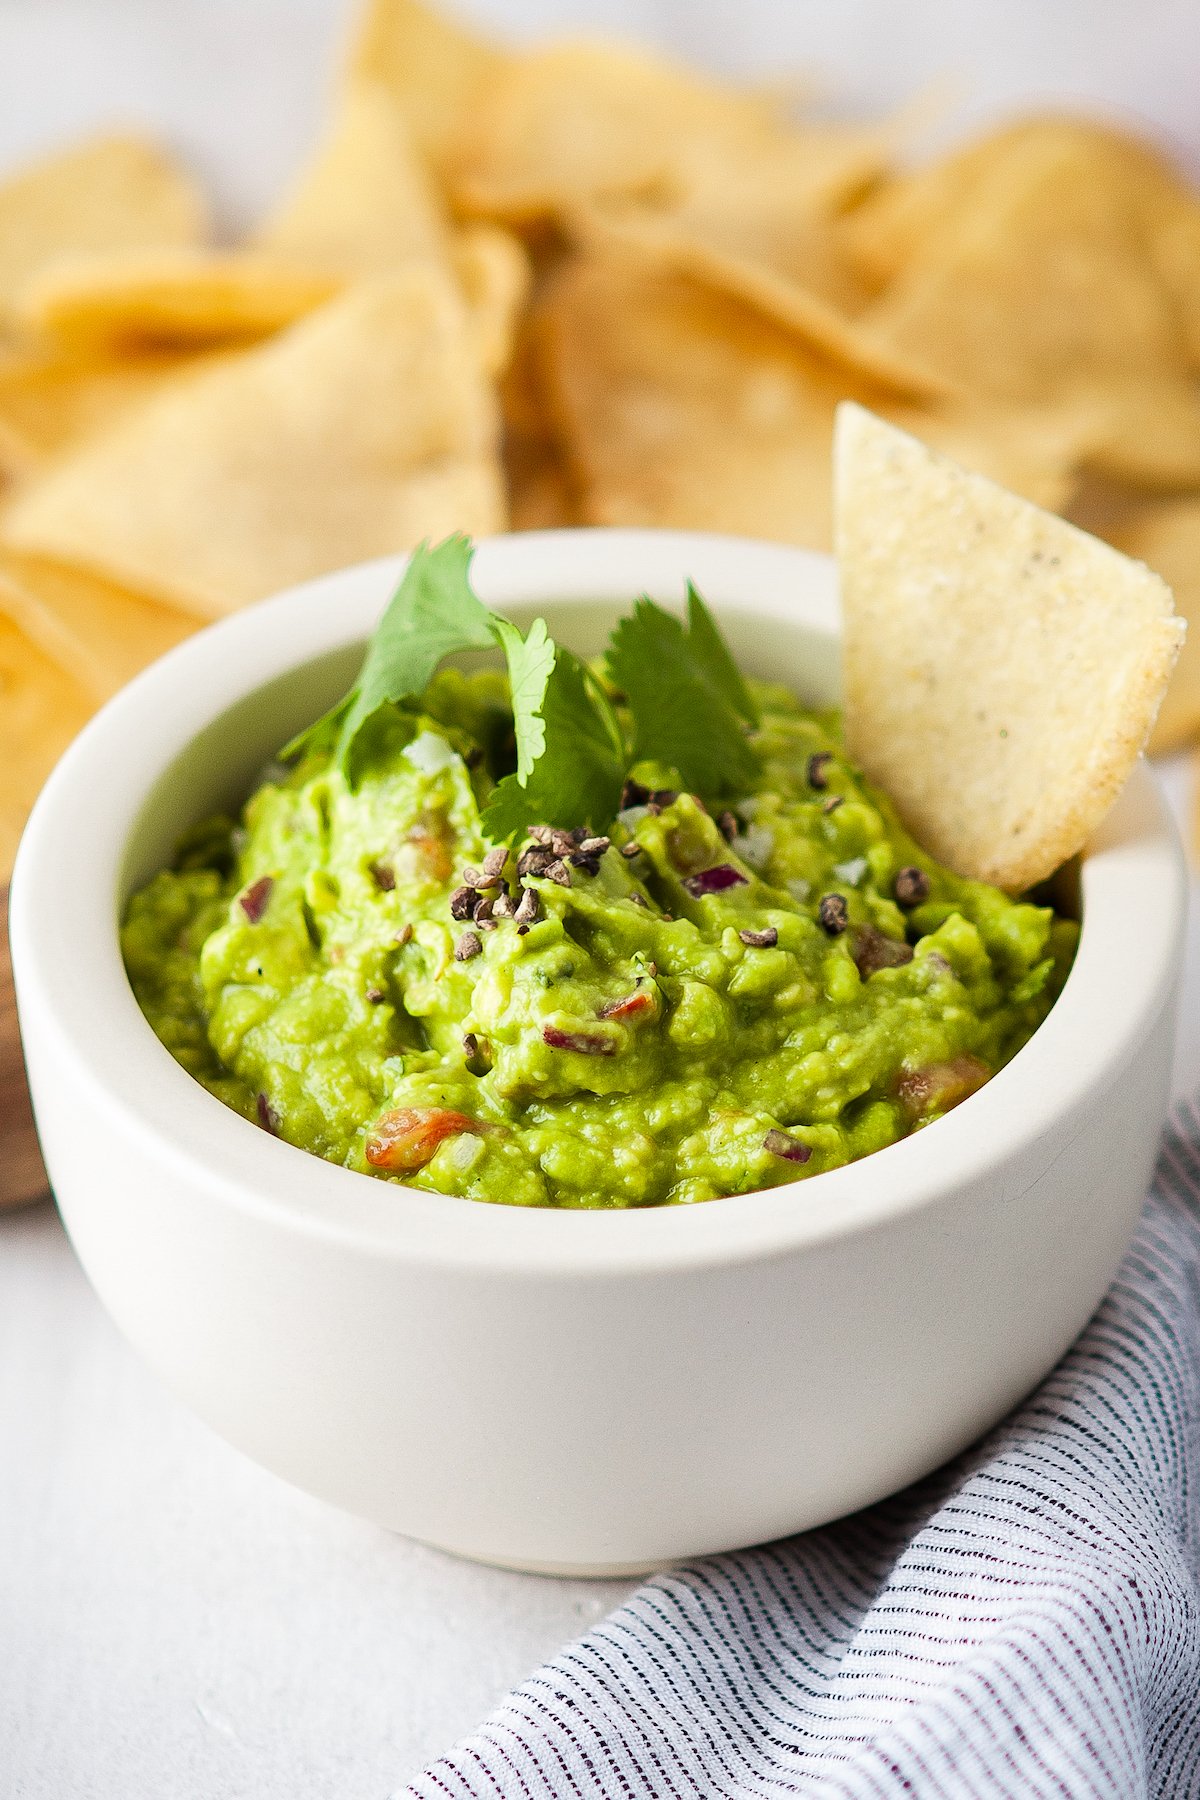 A small white dish of guacamole, garnished with cilantro and a fresh tortilla chip.